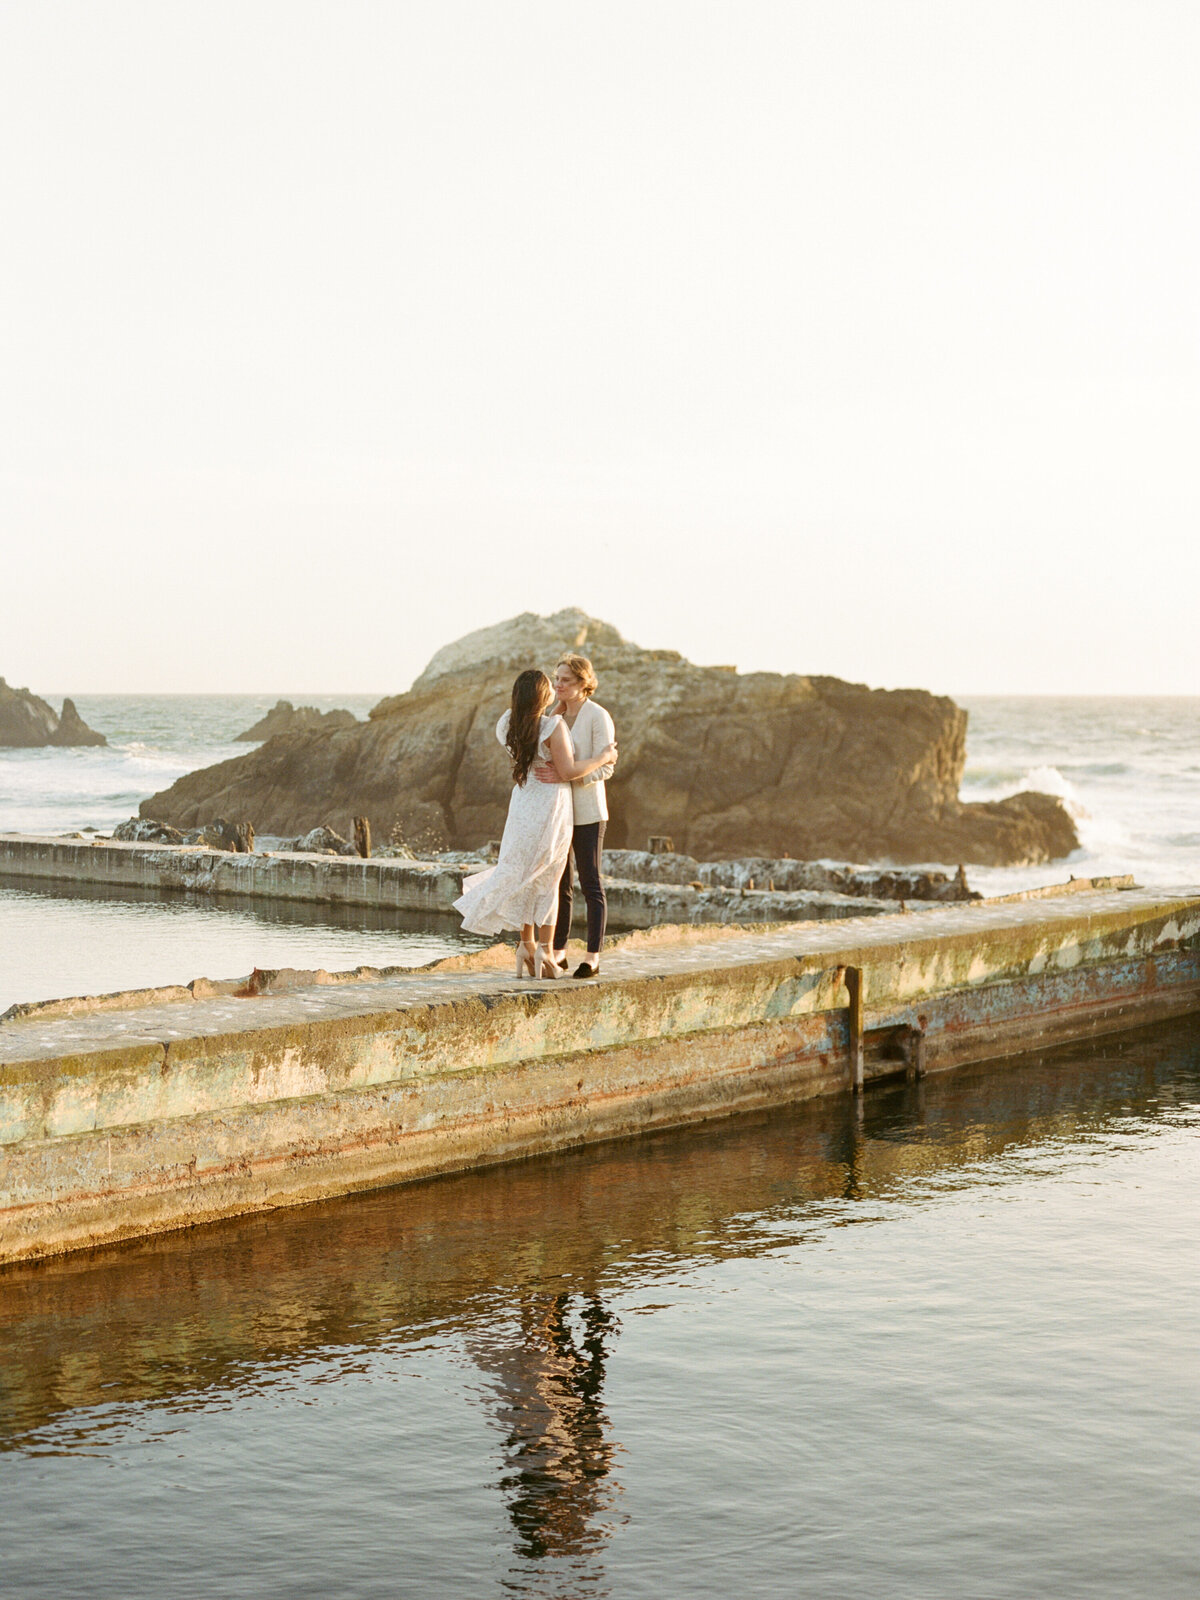 Therese + Melanie San Francisco Land's End Sutro Baths Engagement Session Cassie Valente Photography 0102